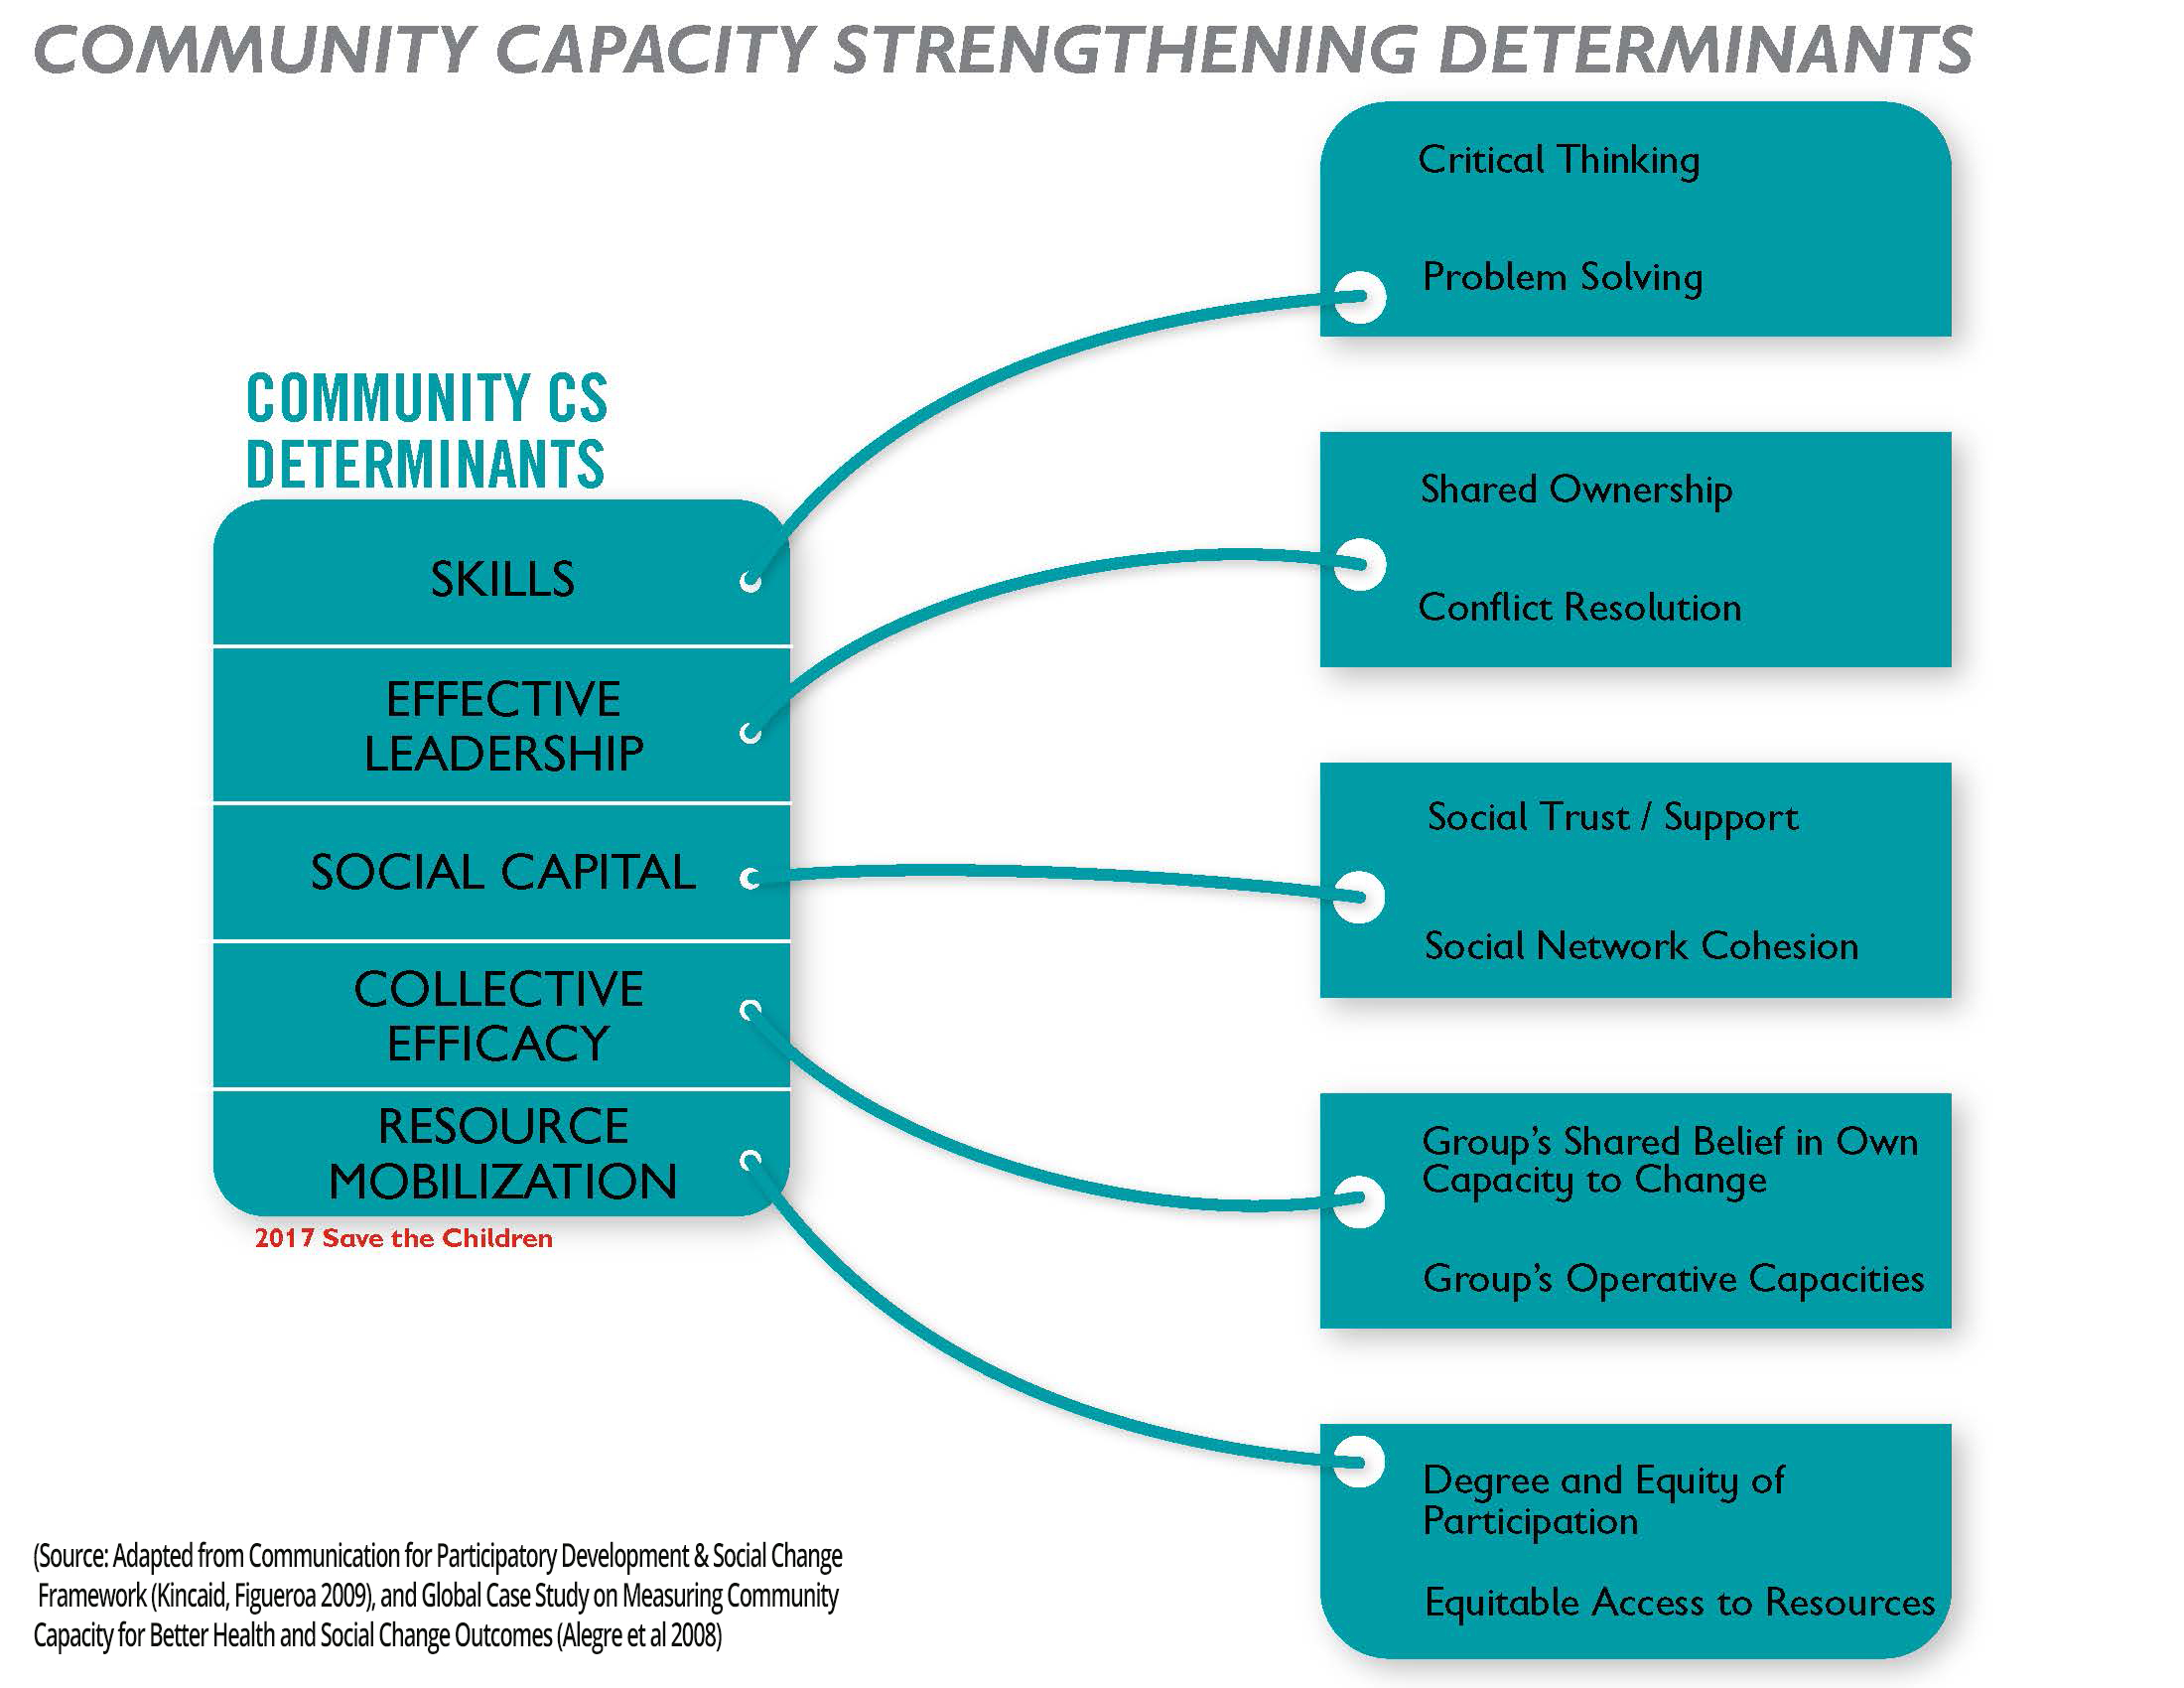 Source: Adapted from Communication for Participatory Development & Social Change Framework (Kincaid, Figueroa 2009), and Global Case Study on Measuring Community Capacity for Better Health and Social Change Outcomes (Alegre et al 2008)